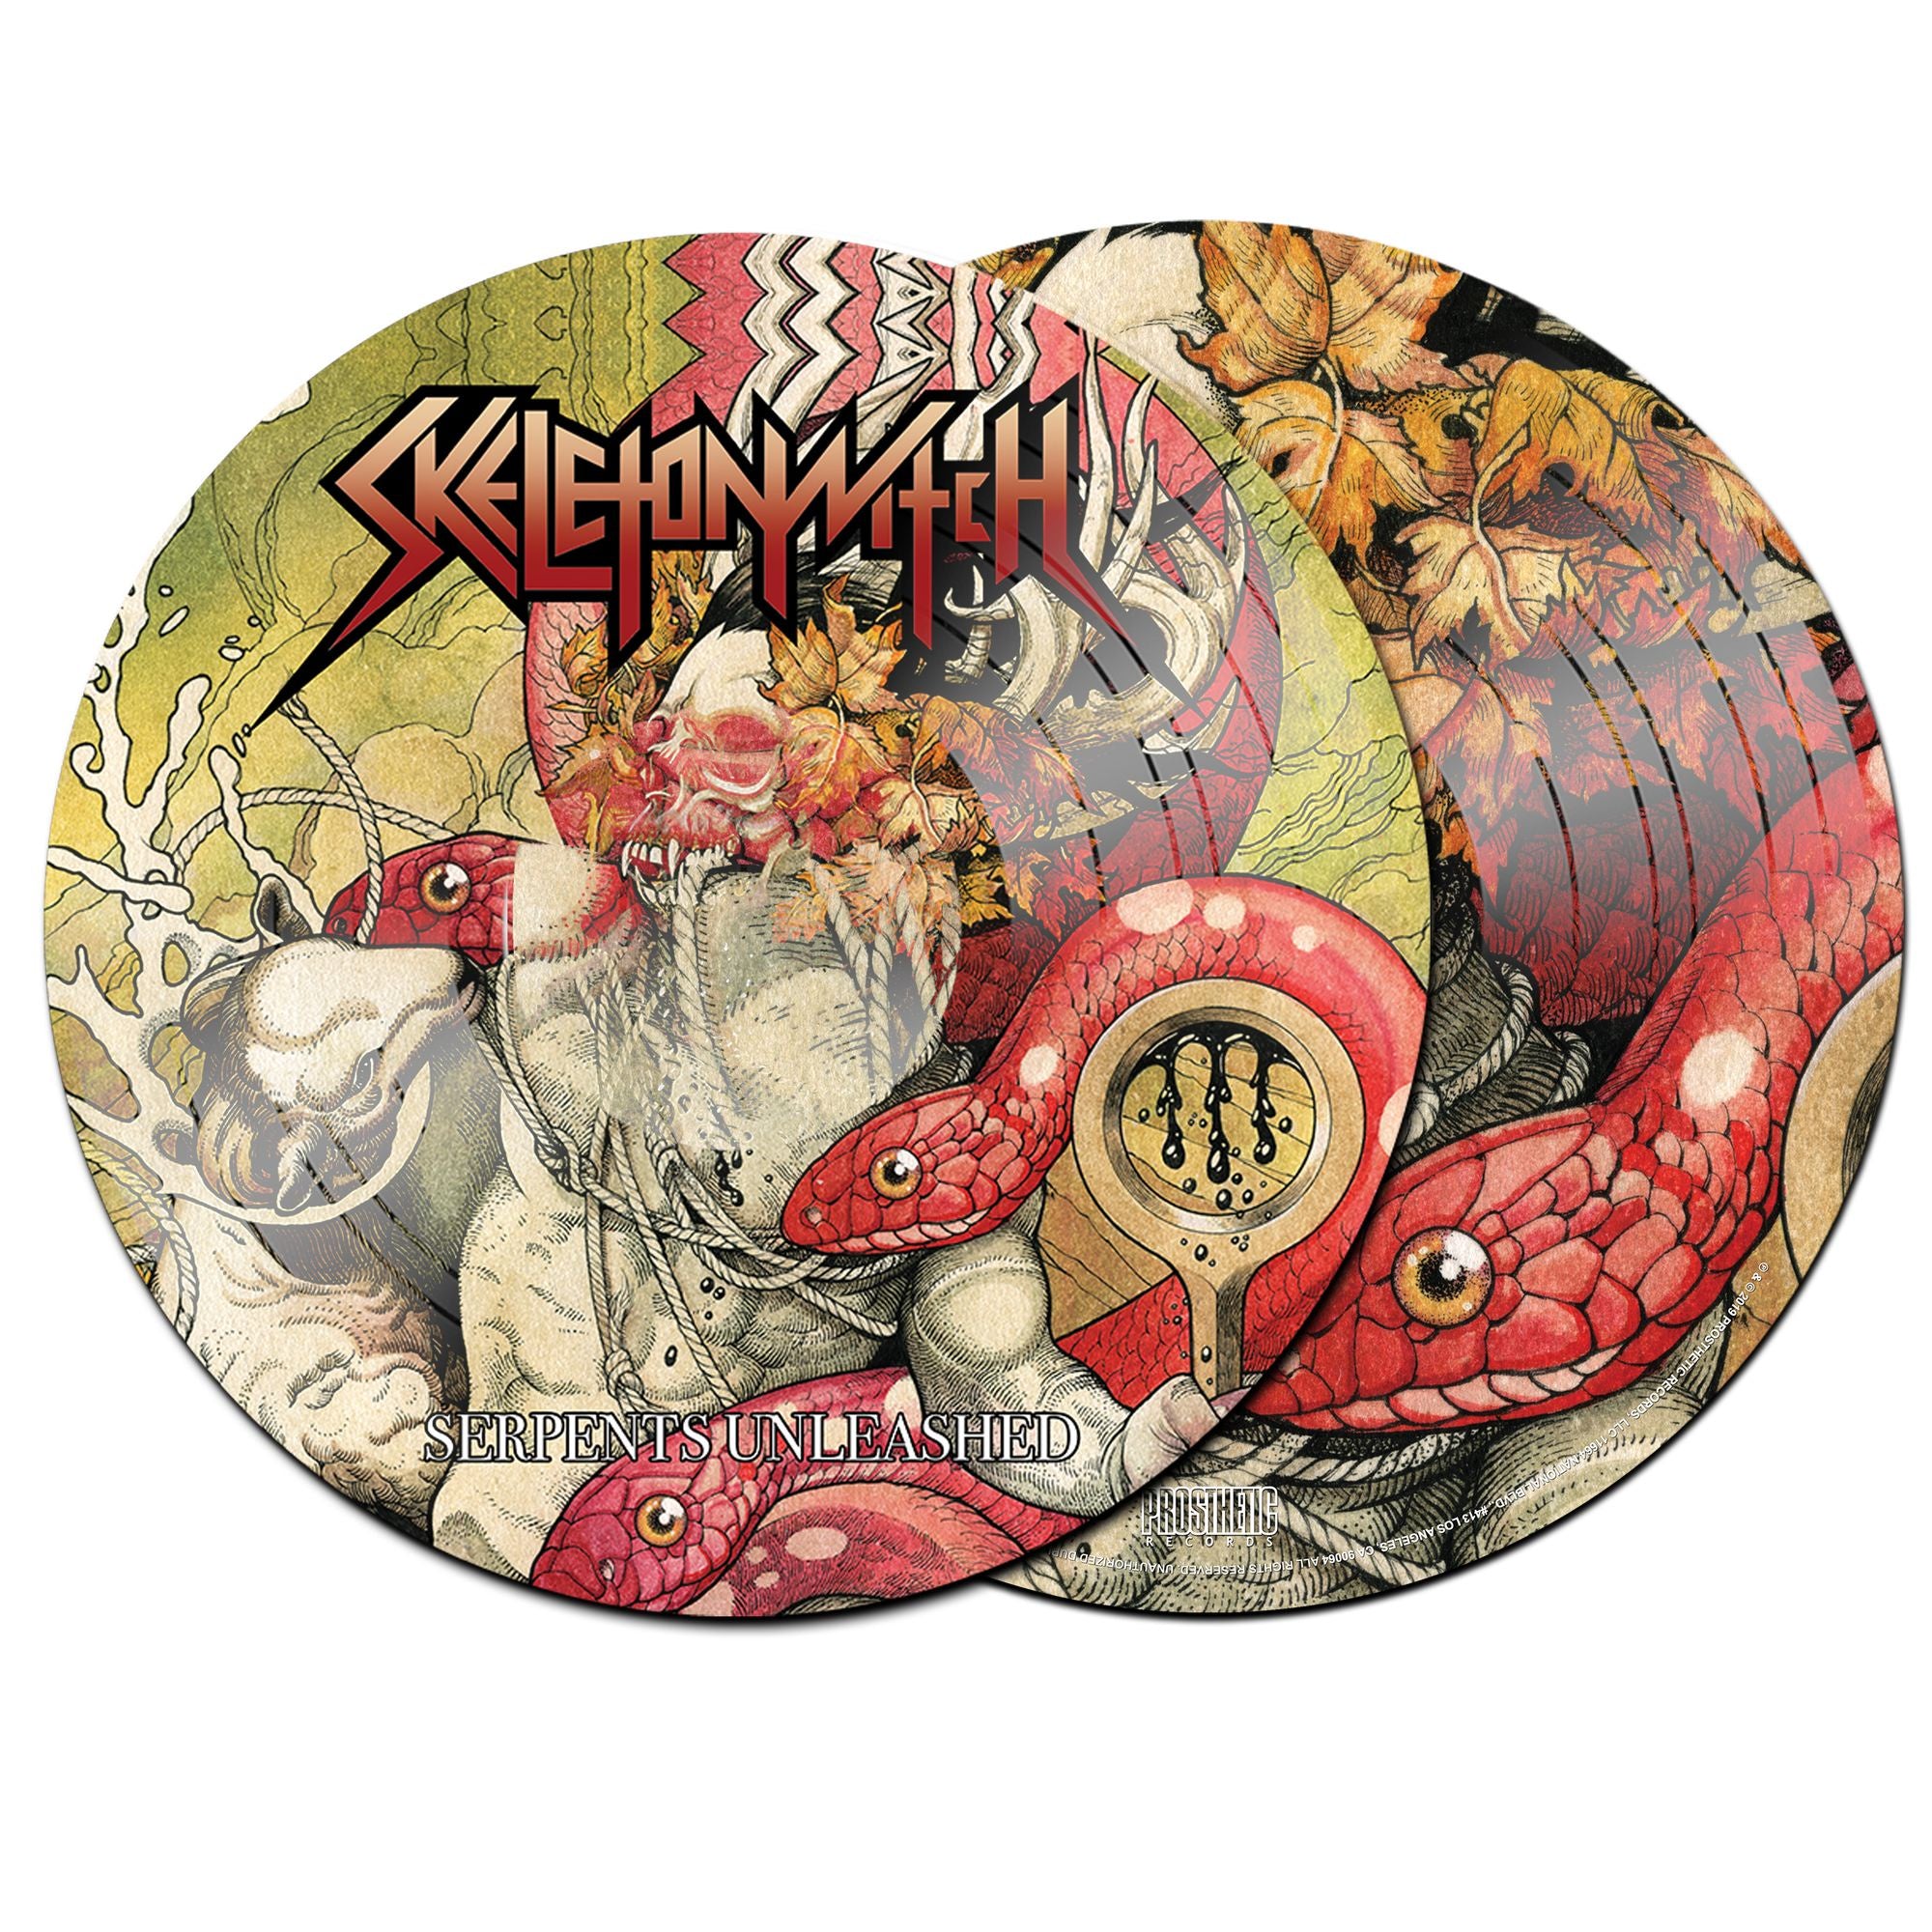 Skeletonwitch - Serpents Unleashed - New Lp 2019 Prosthetic Picture Disc Reissue (Limited to 300 Worldwide!) - Black Metal / Thrash